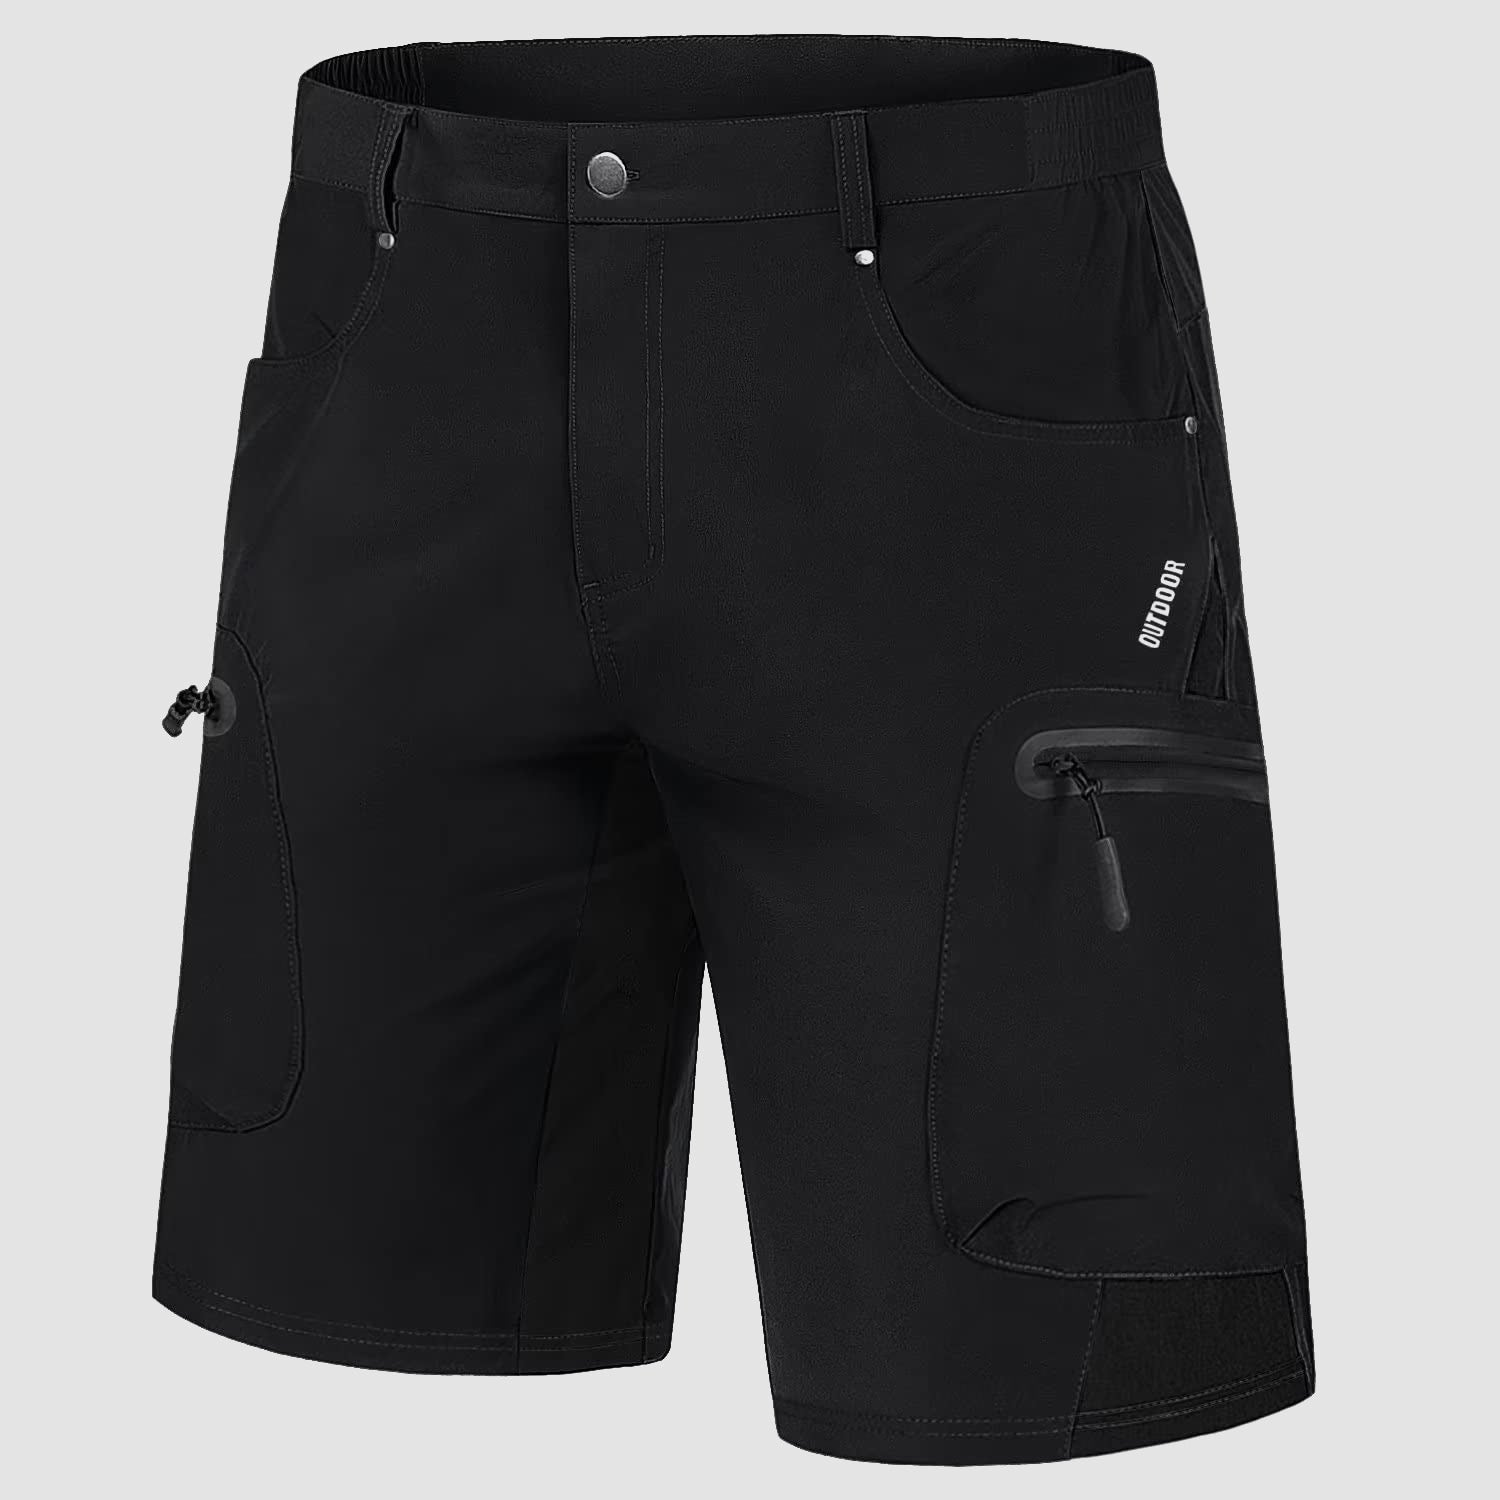 Buy 4 Get the 4th Free！】Men's Cargo Shorts with 5 Pockets Ripstop Qui –  MAGCOMSEN